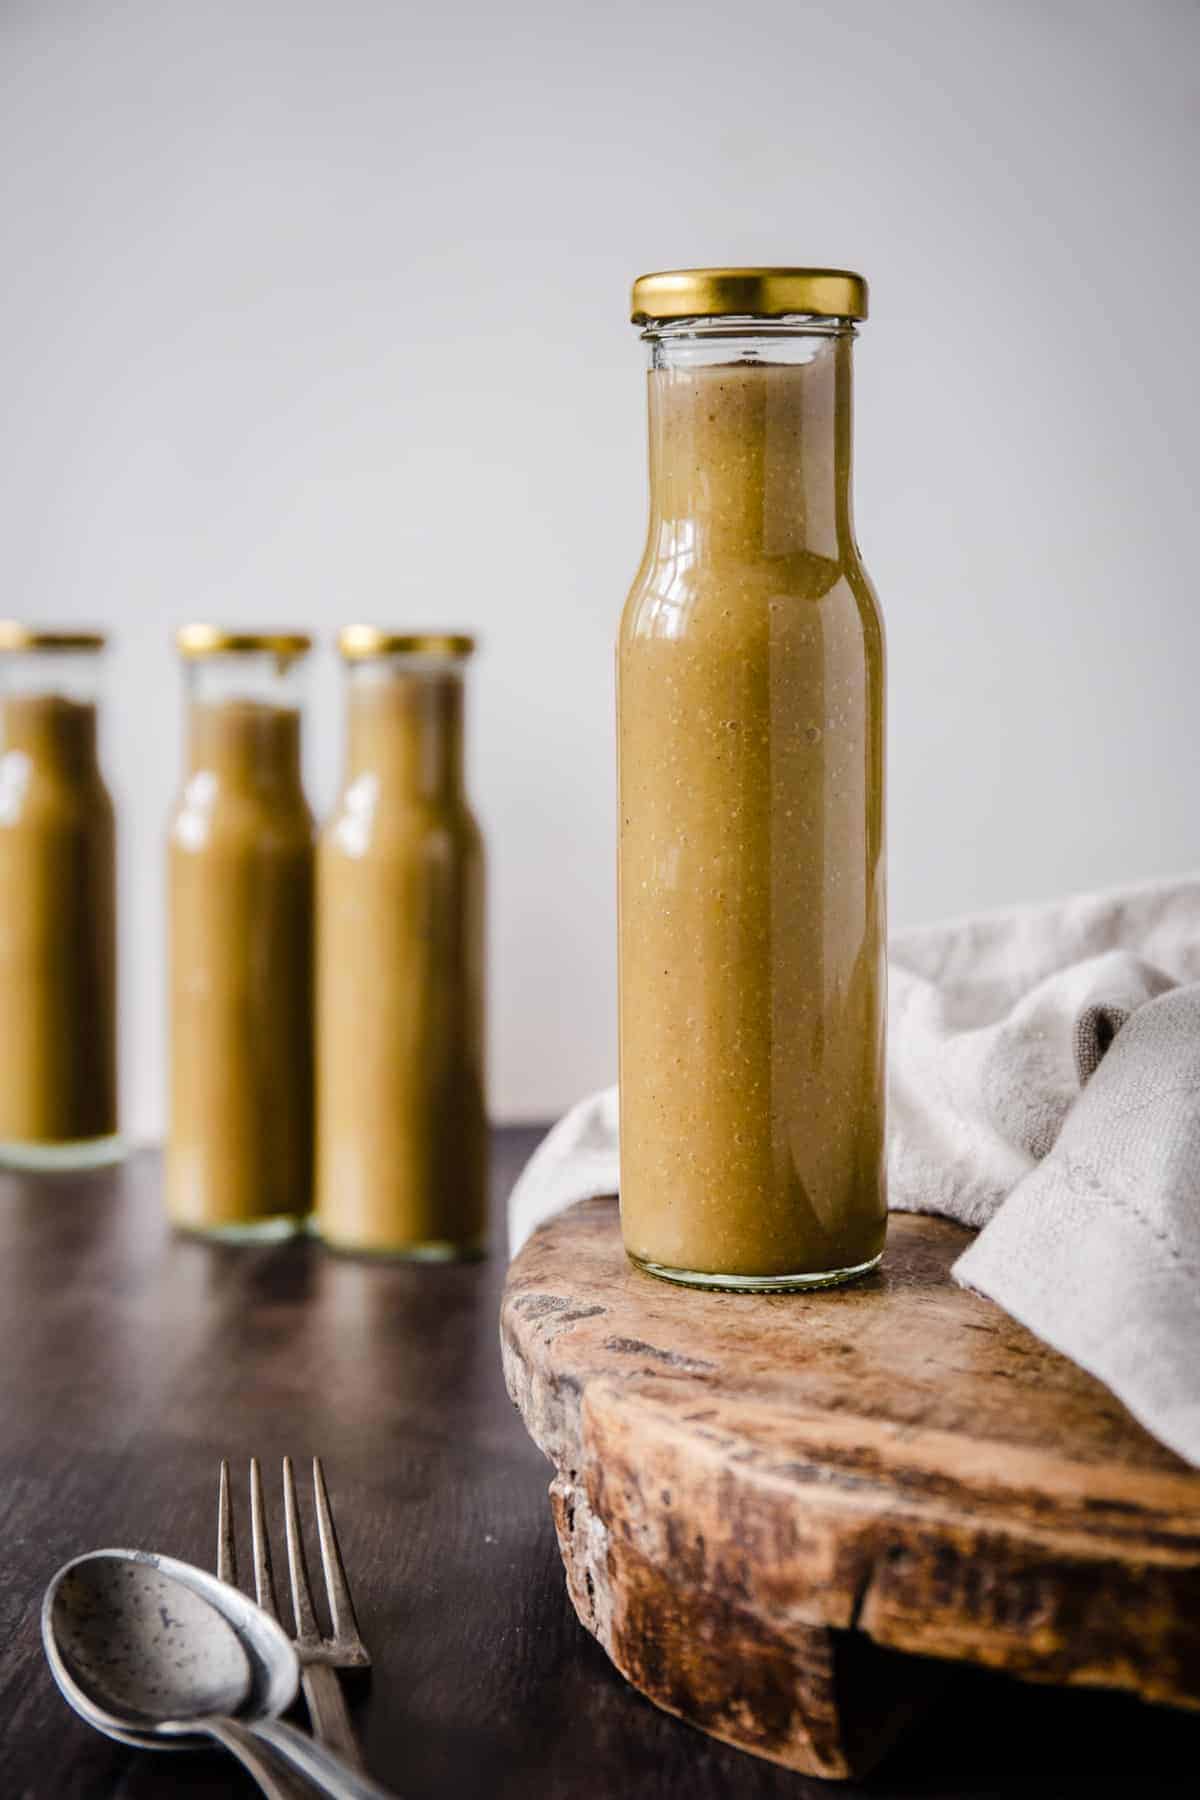 A bottle of Green tomato ketchup on a wooden board